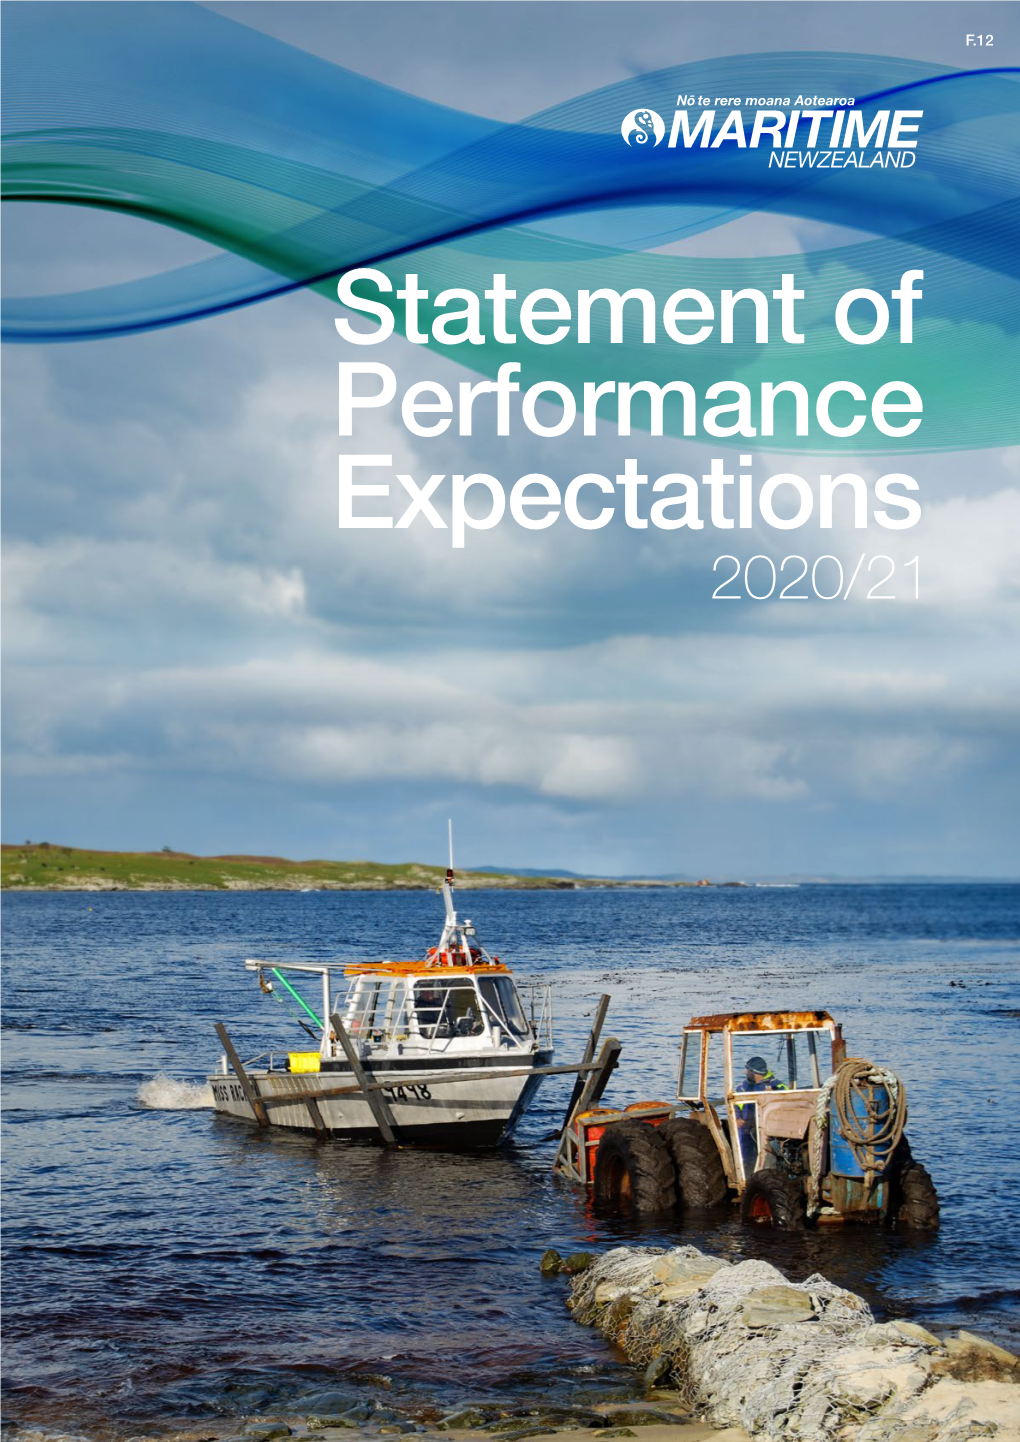 Statement of Performance Expectations for 2020/21 13